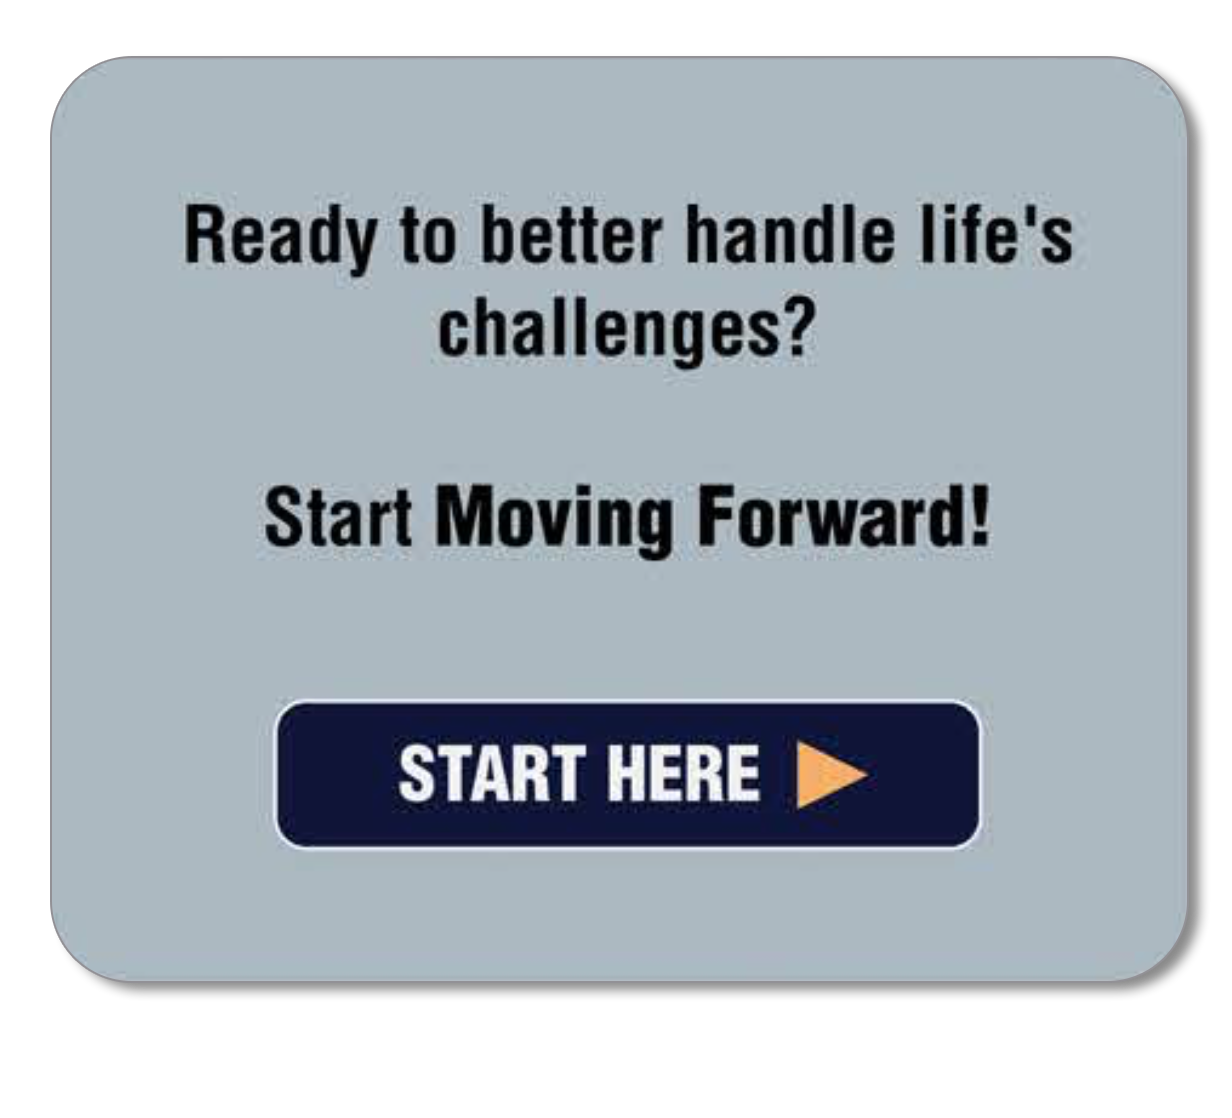 Ready to handle lifes challenges? Start Moving Forward.